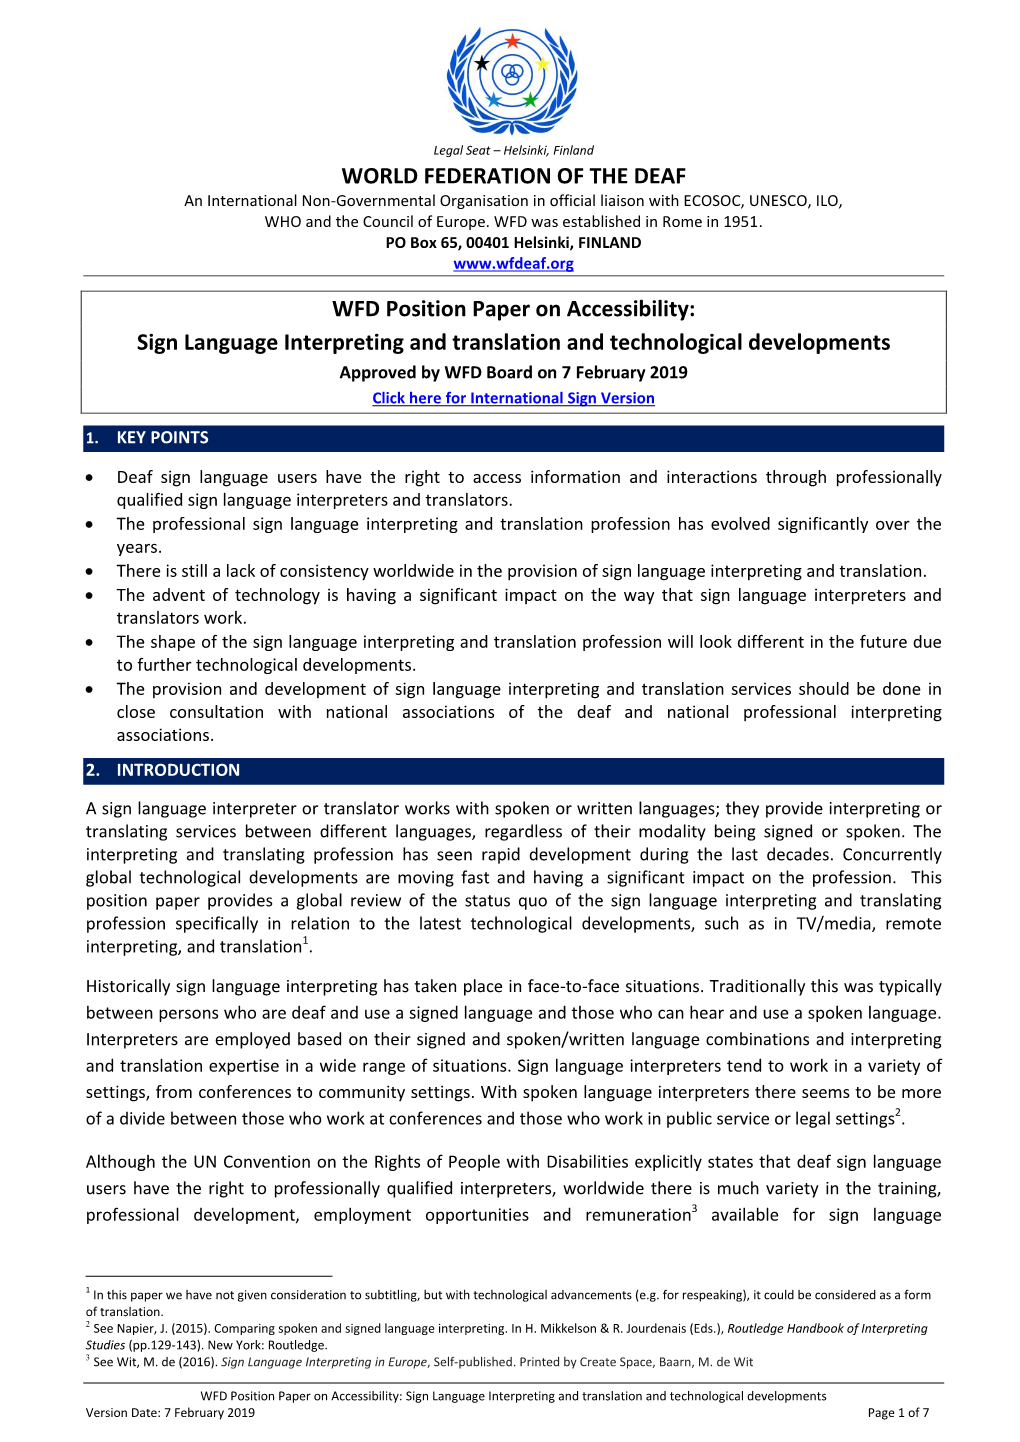 WFD Position Paper on Accessibility: Sign Language Interpreting And